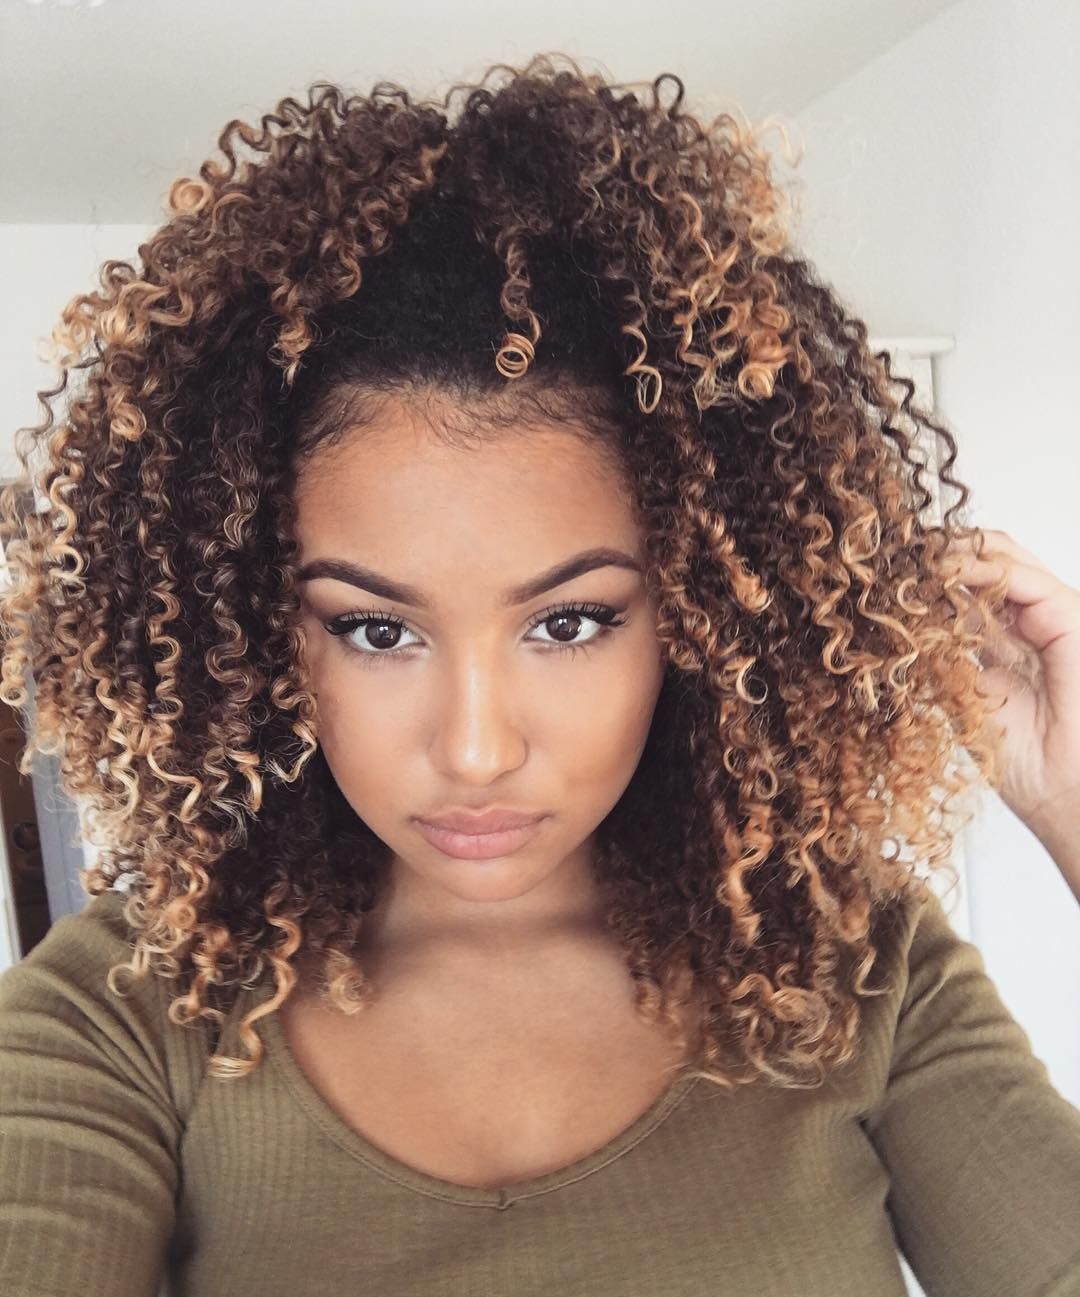 15+ Black Curly Hair with Blonde Highlights - The Mews Beauty